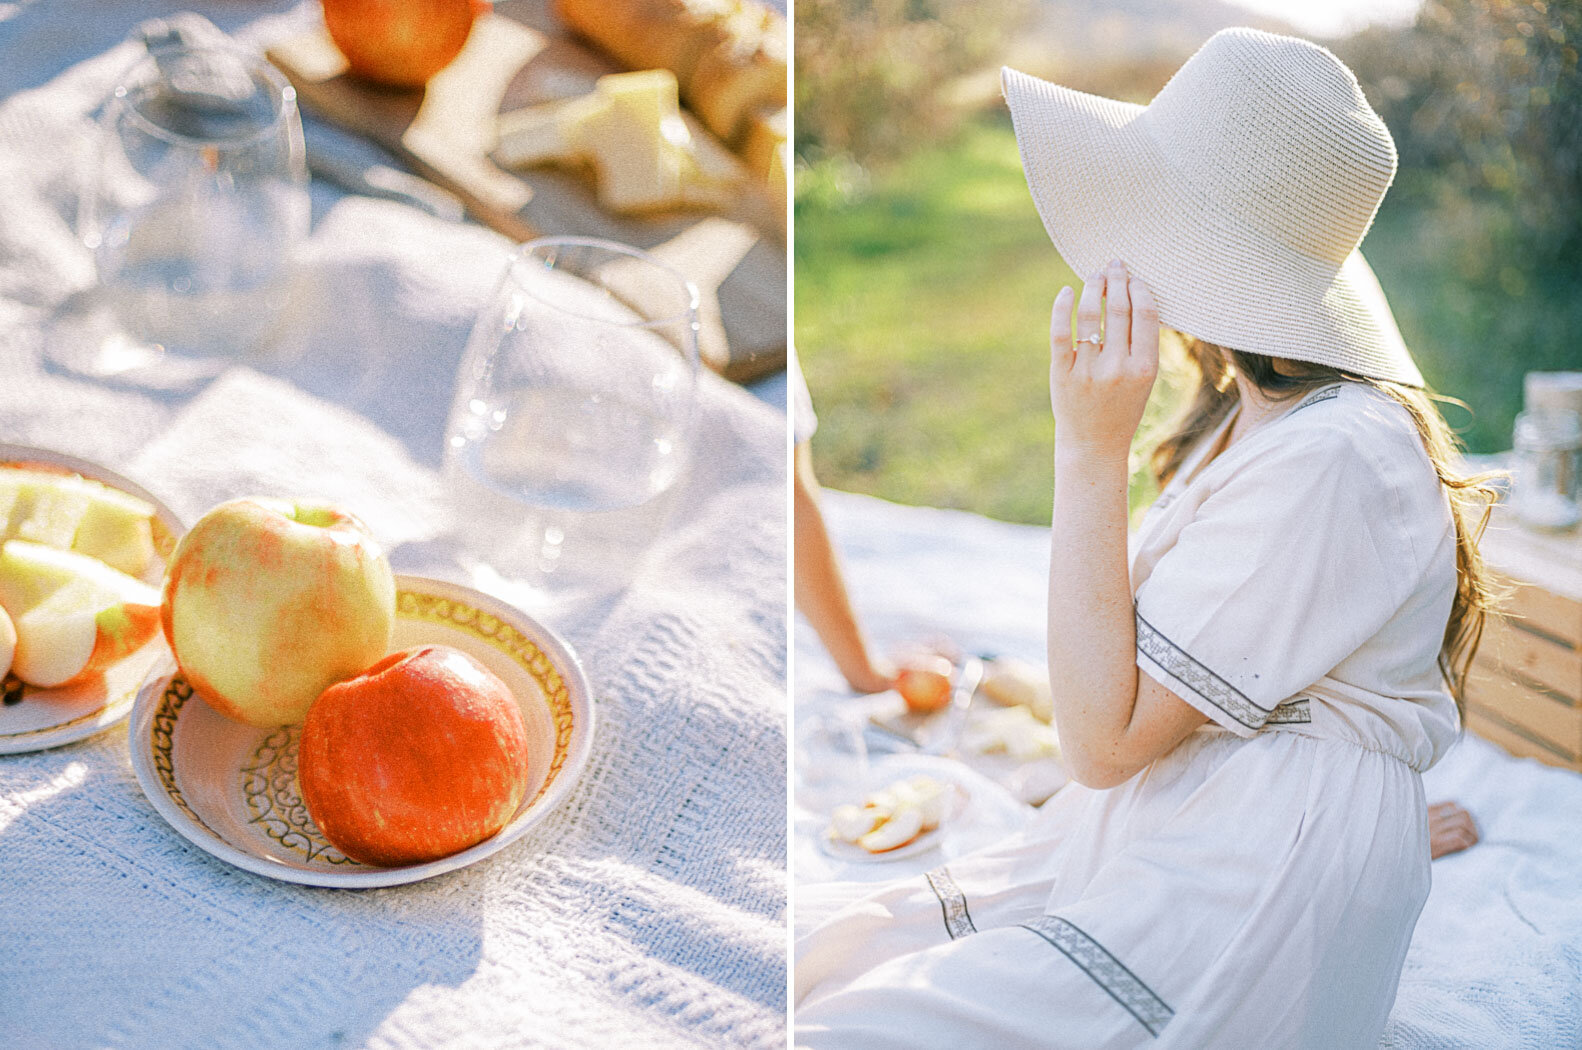 red-apple-in-bowl-at-picnic-with-woman-wearing-a-straw-hat-and-white-dress-in-virginia-in-the-fall.jpg